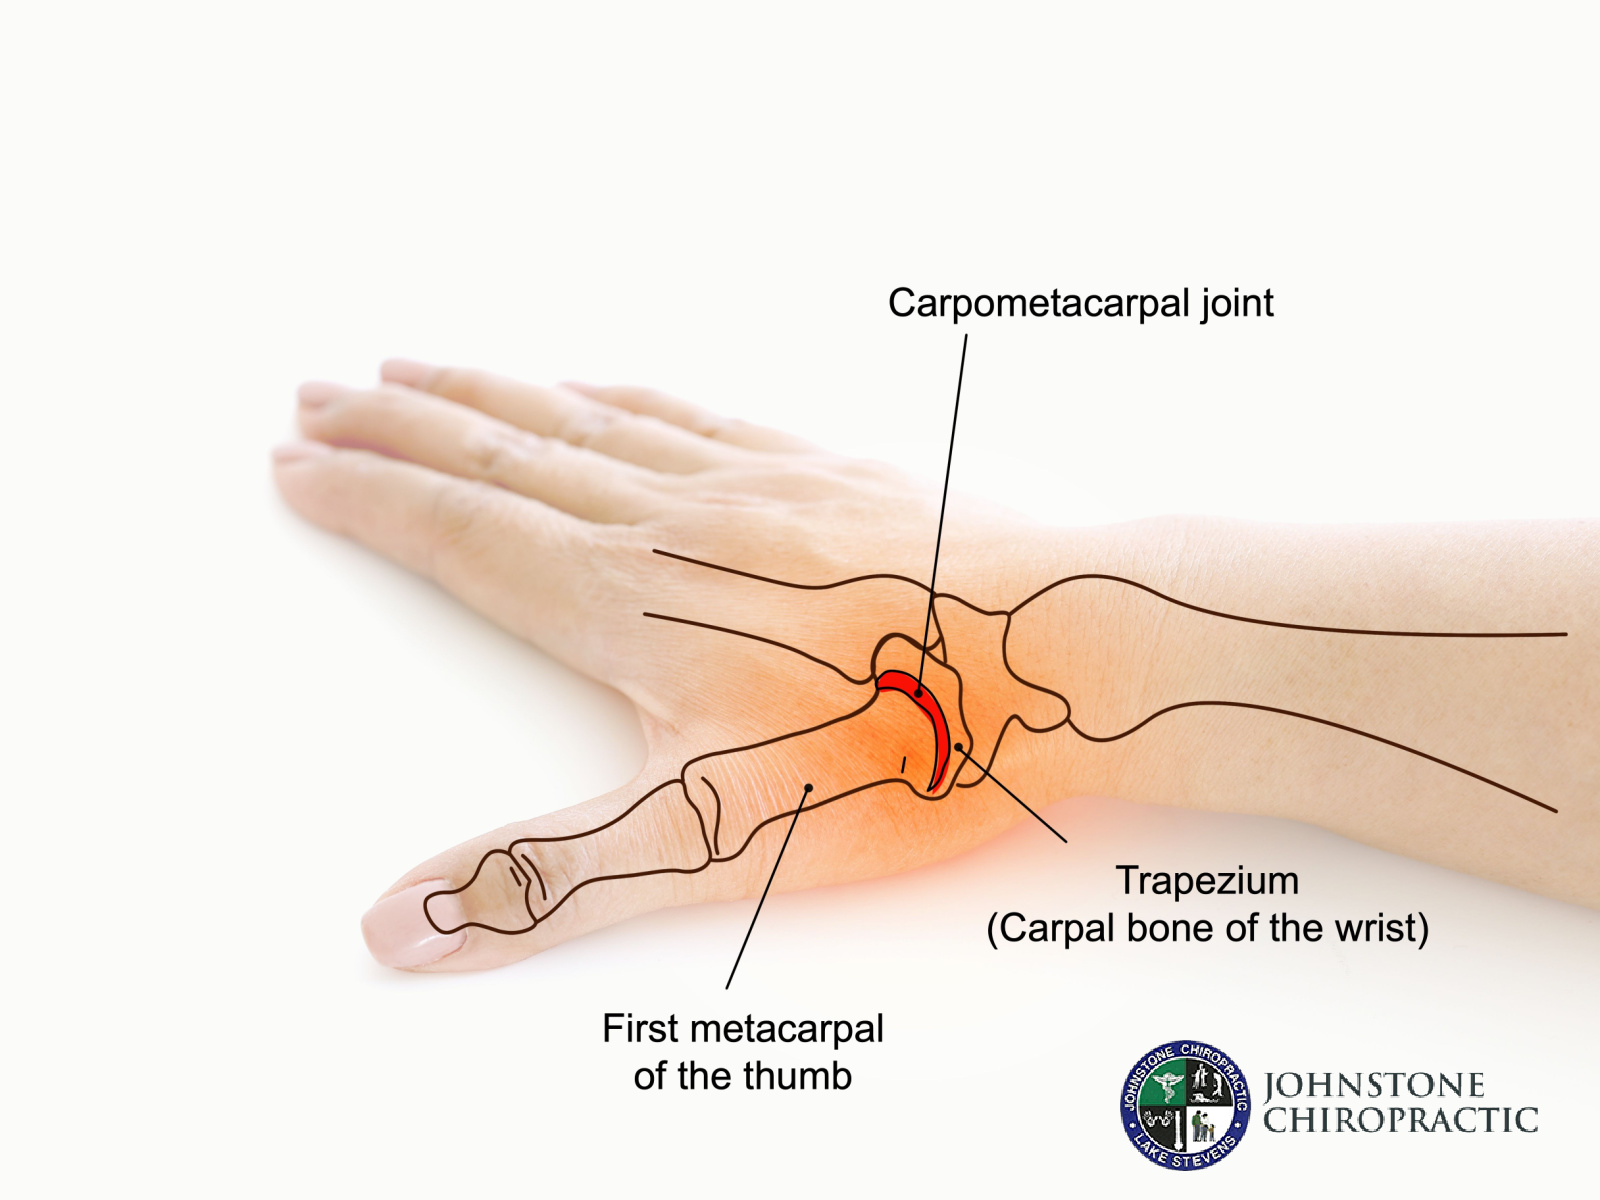 Find Relief for Carpal Tunnel Syndrome with Effective, Holistic Chiropractic Care